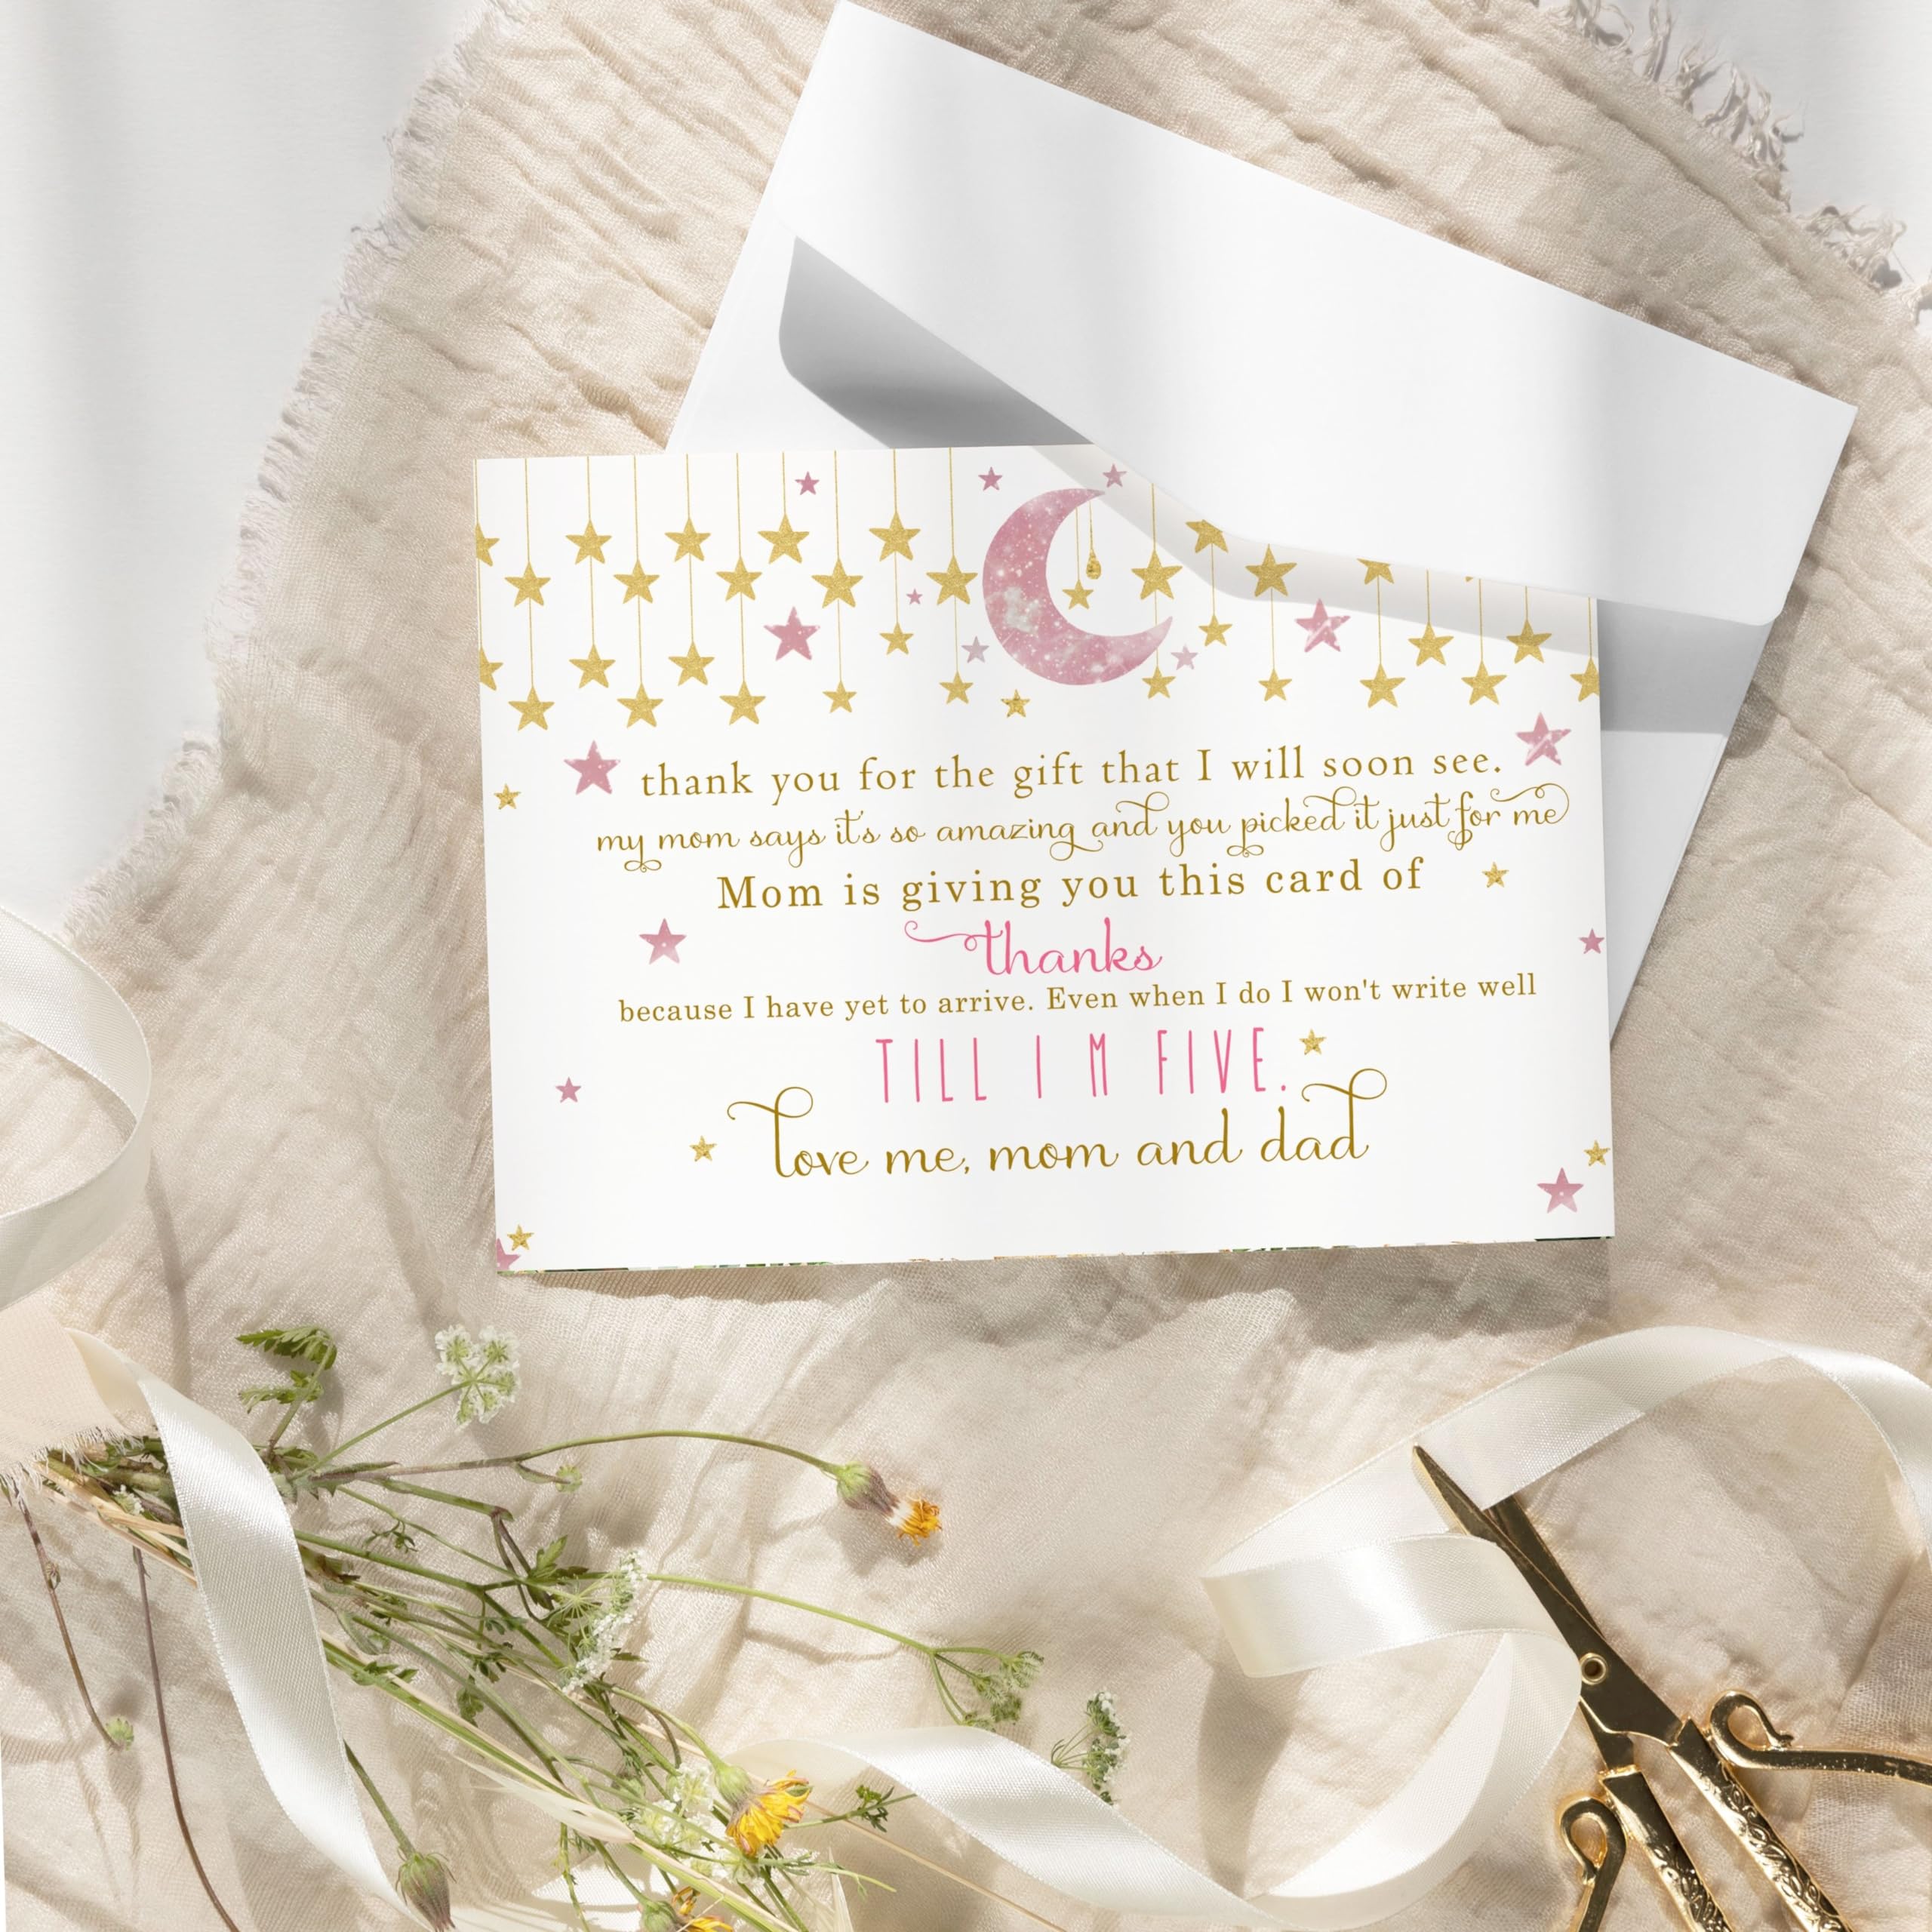 25 Twinkle Little Star Baby Thank You Cards Pack – Girls Baby Shower Notes with Envelopes Set, Prefilled Message, Customizable and Personalize Blank Stationery Pink and Gold, New Parents Gift Ideas